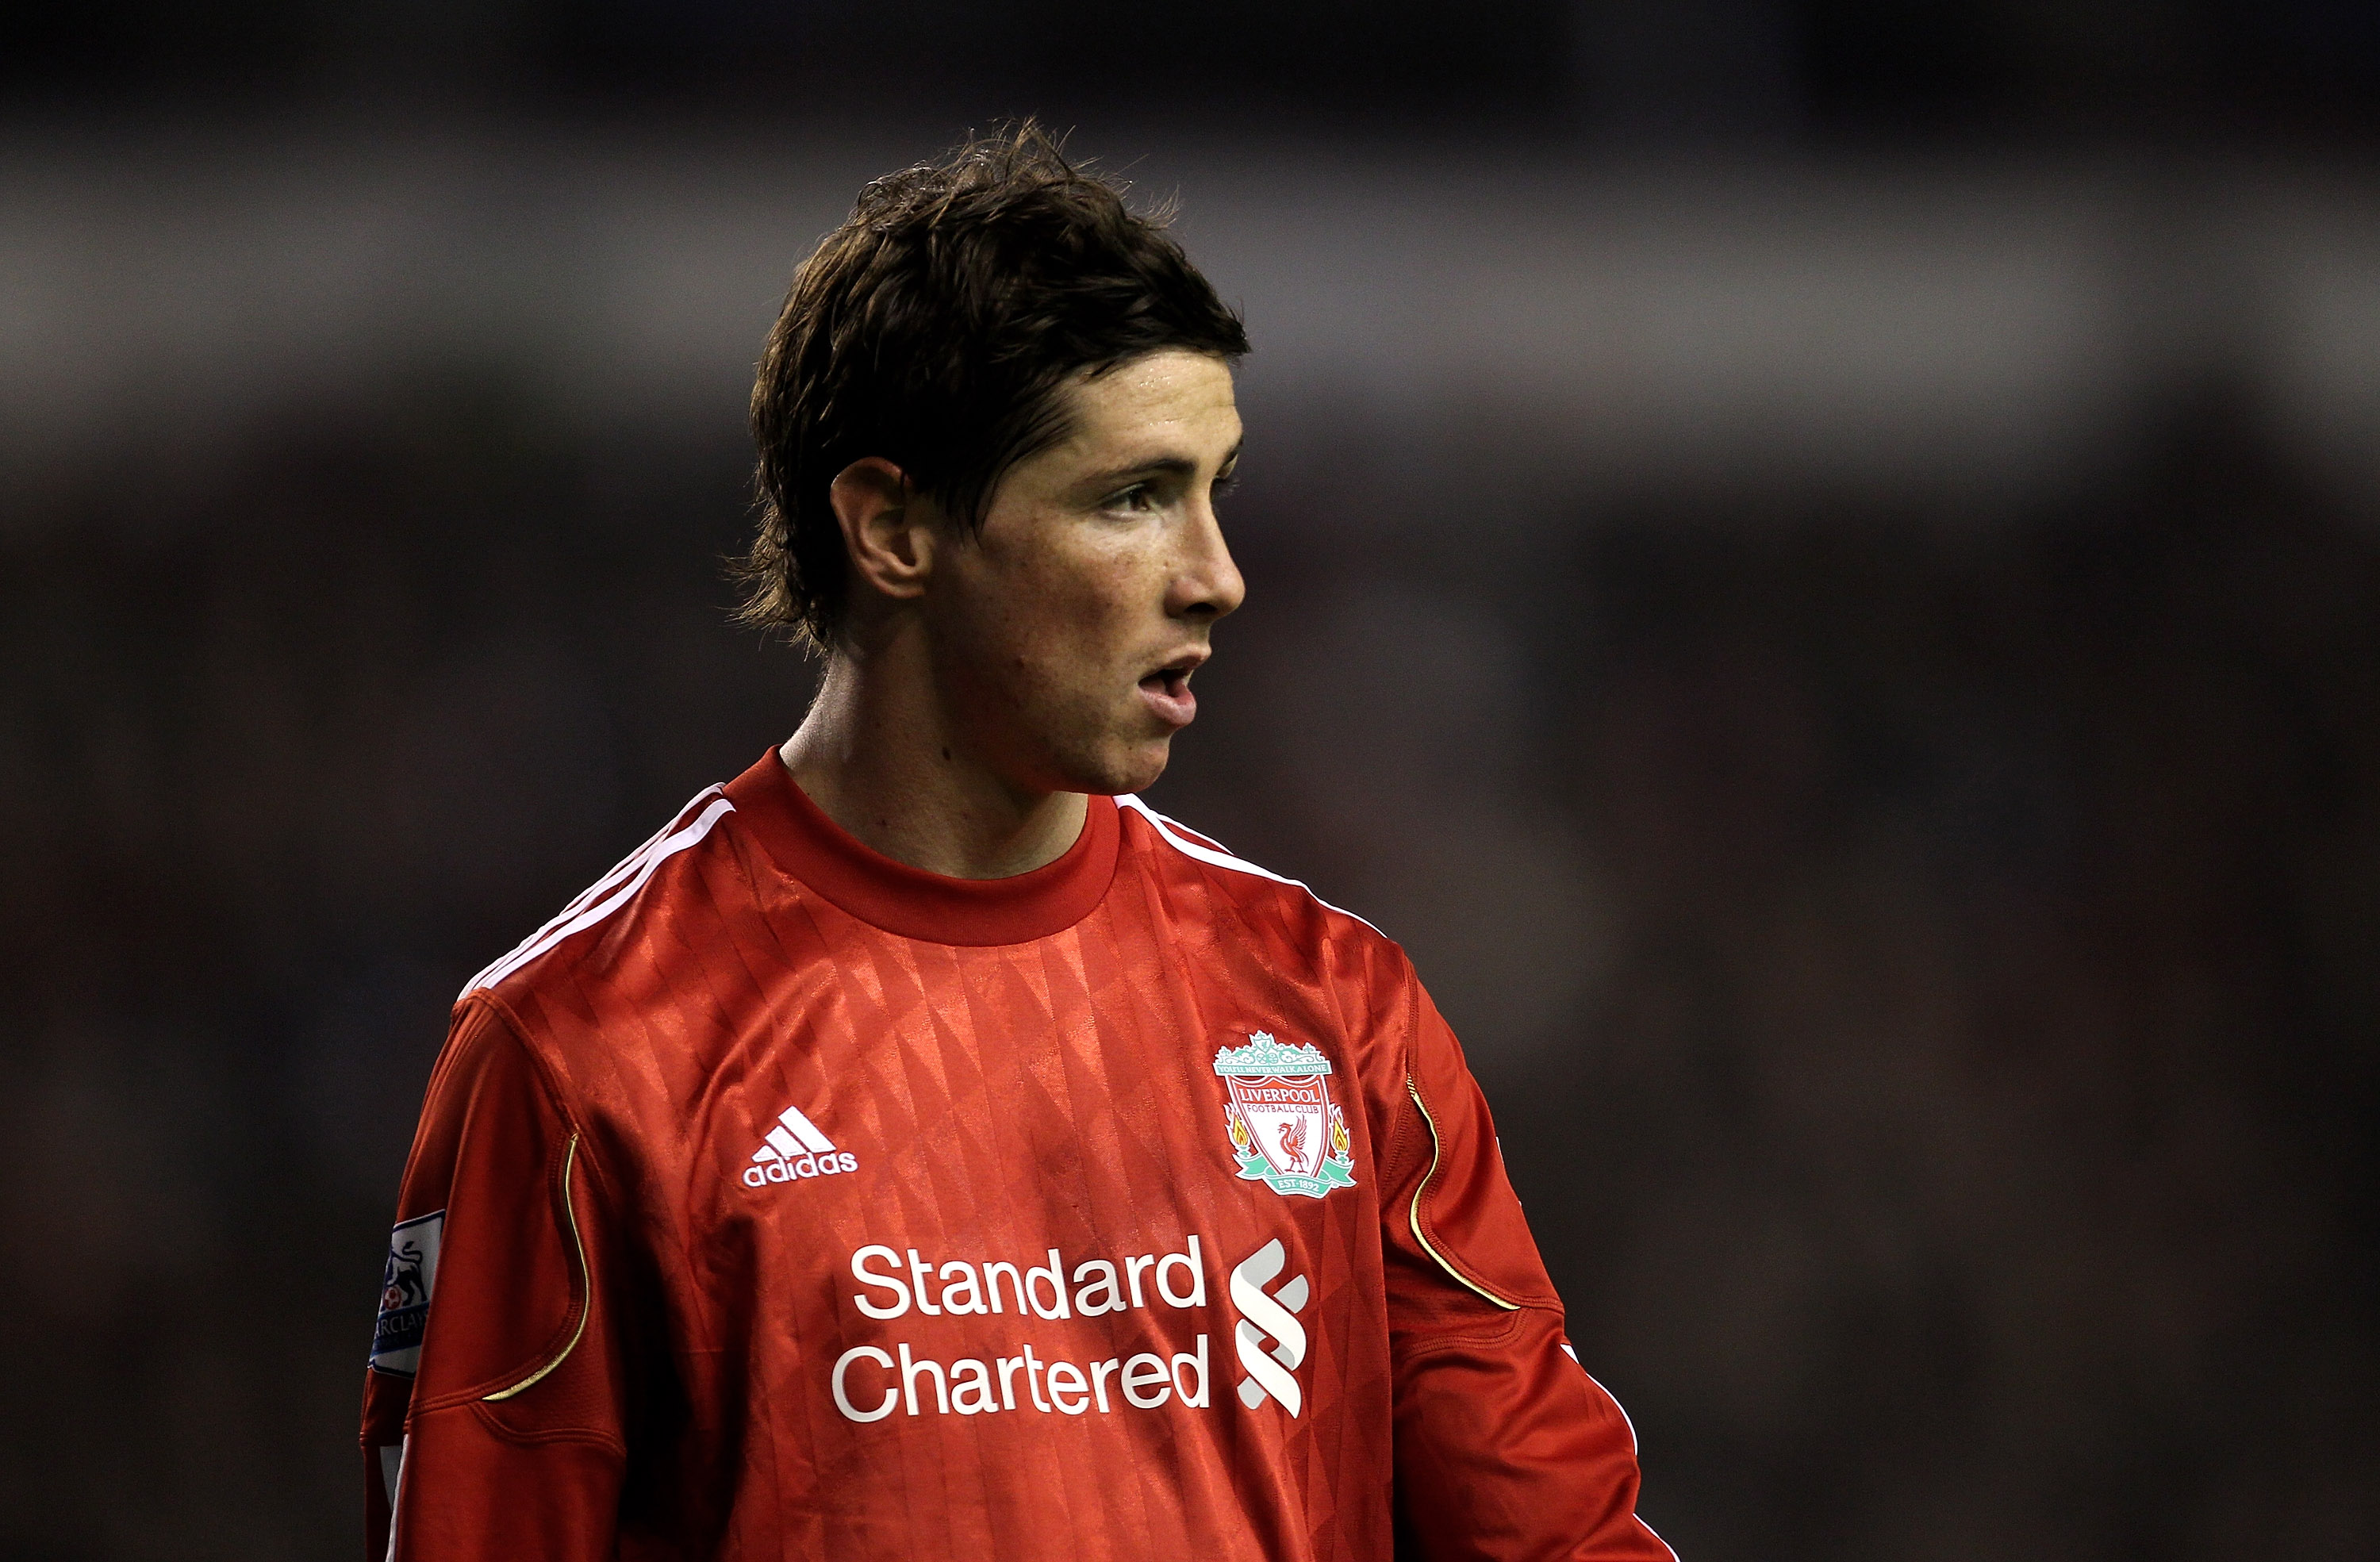 LIVERPOOL, ENGLAND - NOVEMBER 20:  Fernando Torres of Liverpool looks on during the Barclays Premier League match between Liverpool and West Ham United at Anfield on November 20, 2010 in Liverpool, England.  (Photo by Alex Livesey/Getty Images)